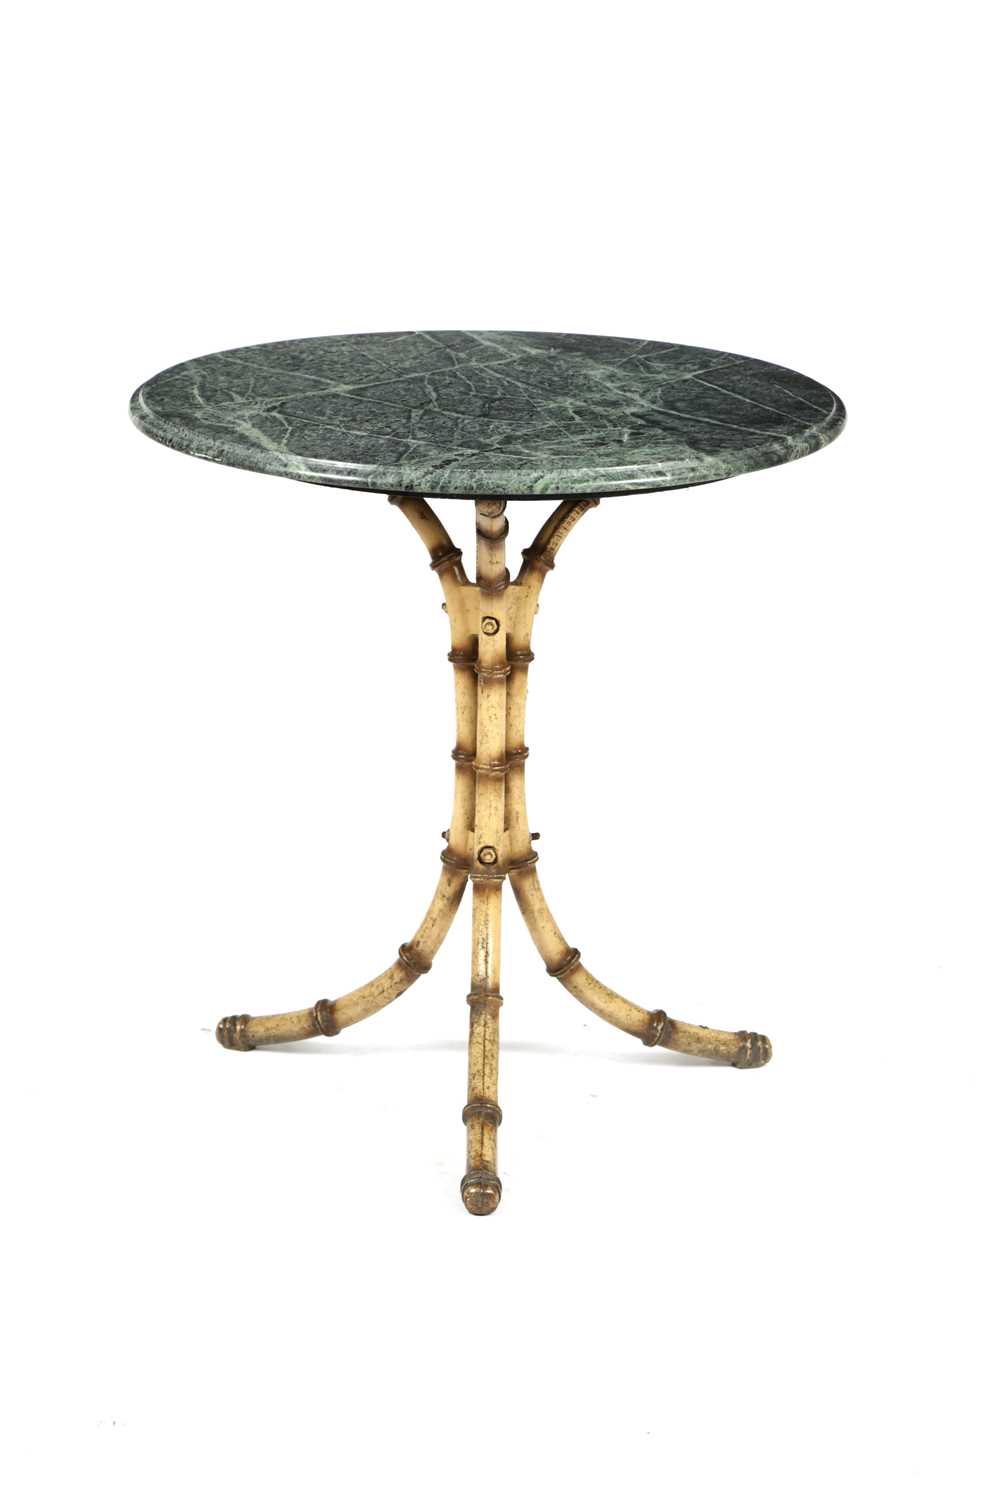 A VICTORIAN CAST IRON AND MARBLE FAUX BAMBOO TABLE LATE 19TH CENTURY the naturalistically painted - Image 2 of 2